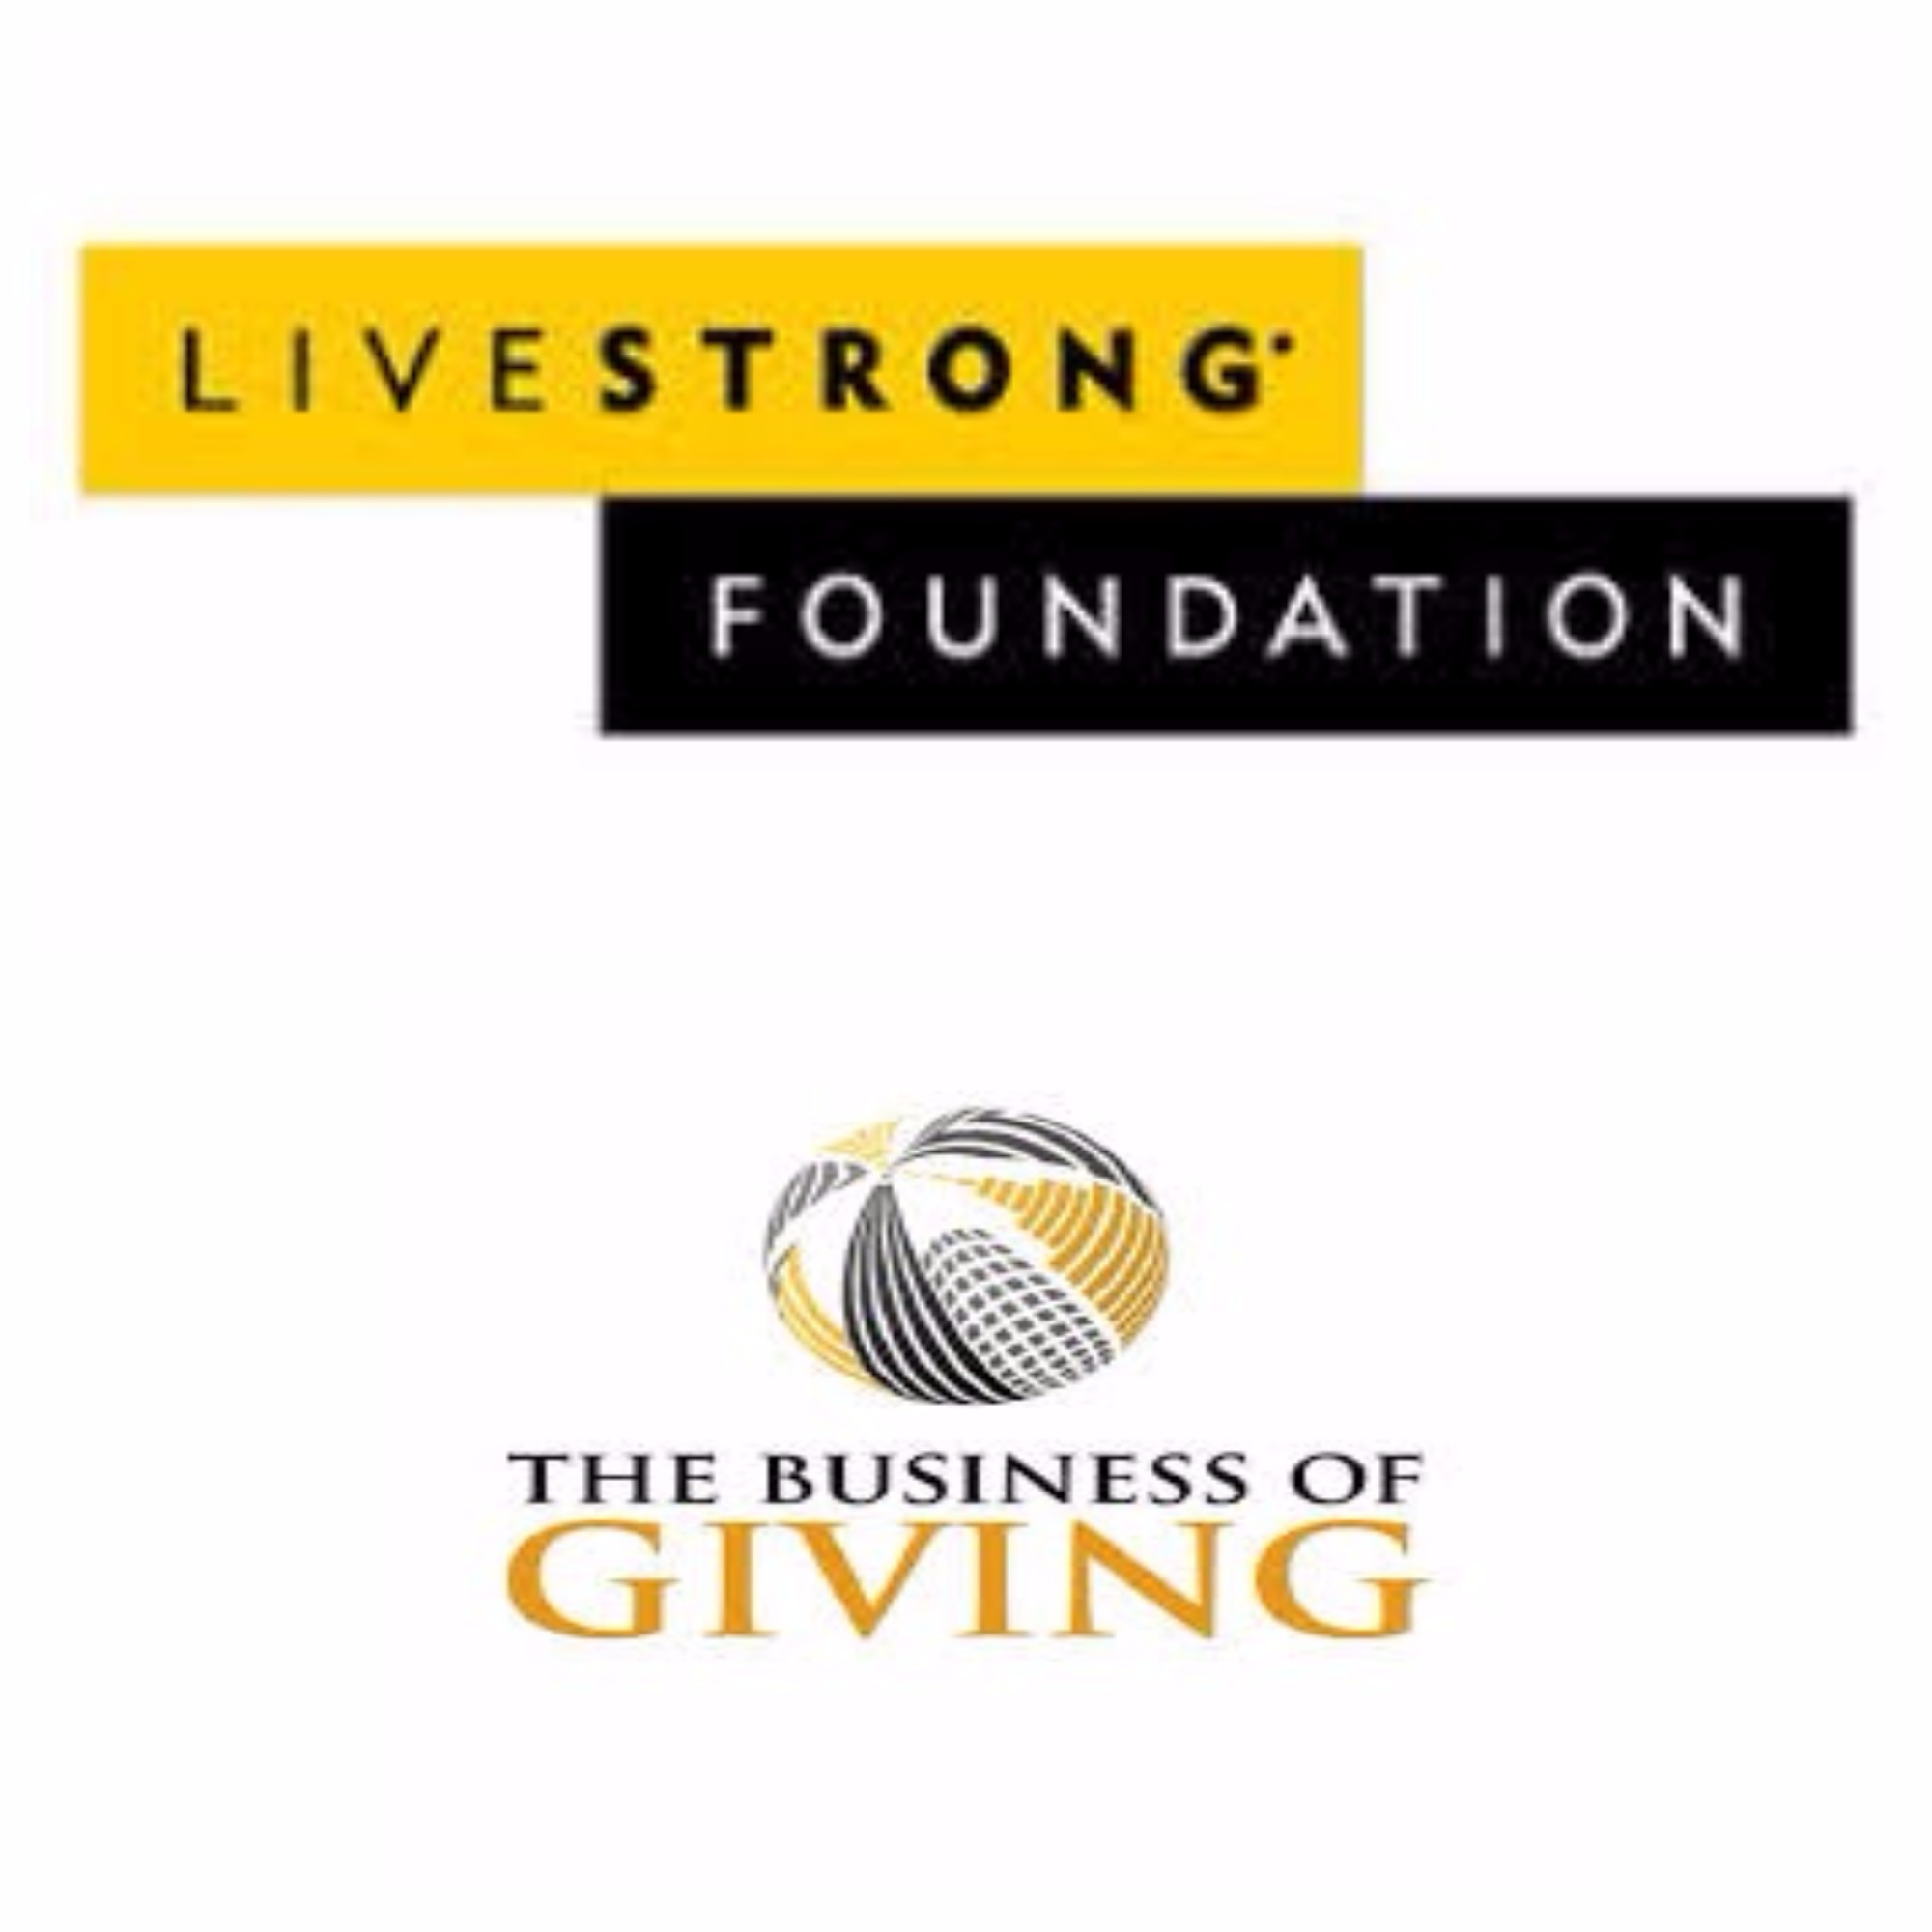 Greg Lee, President of The LIVESTRONG Foundation